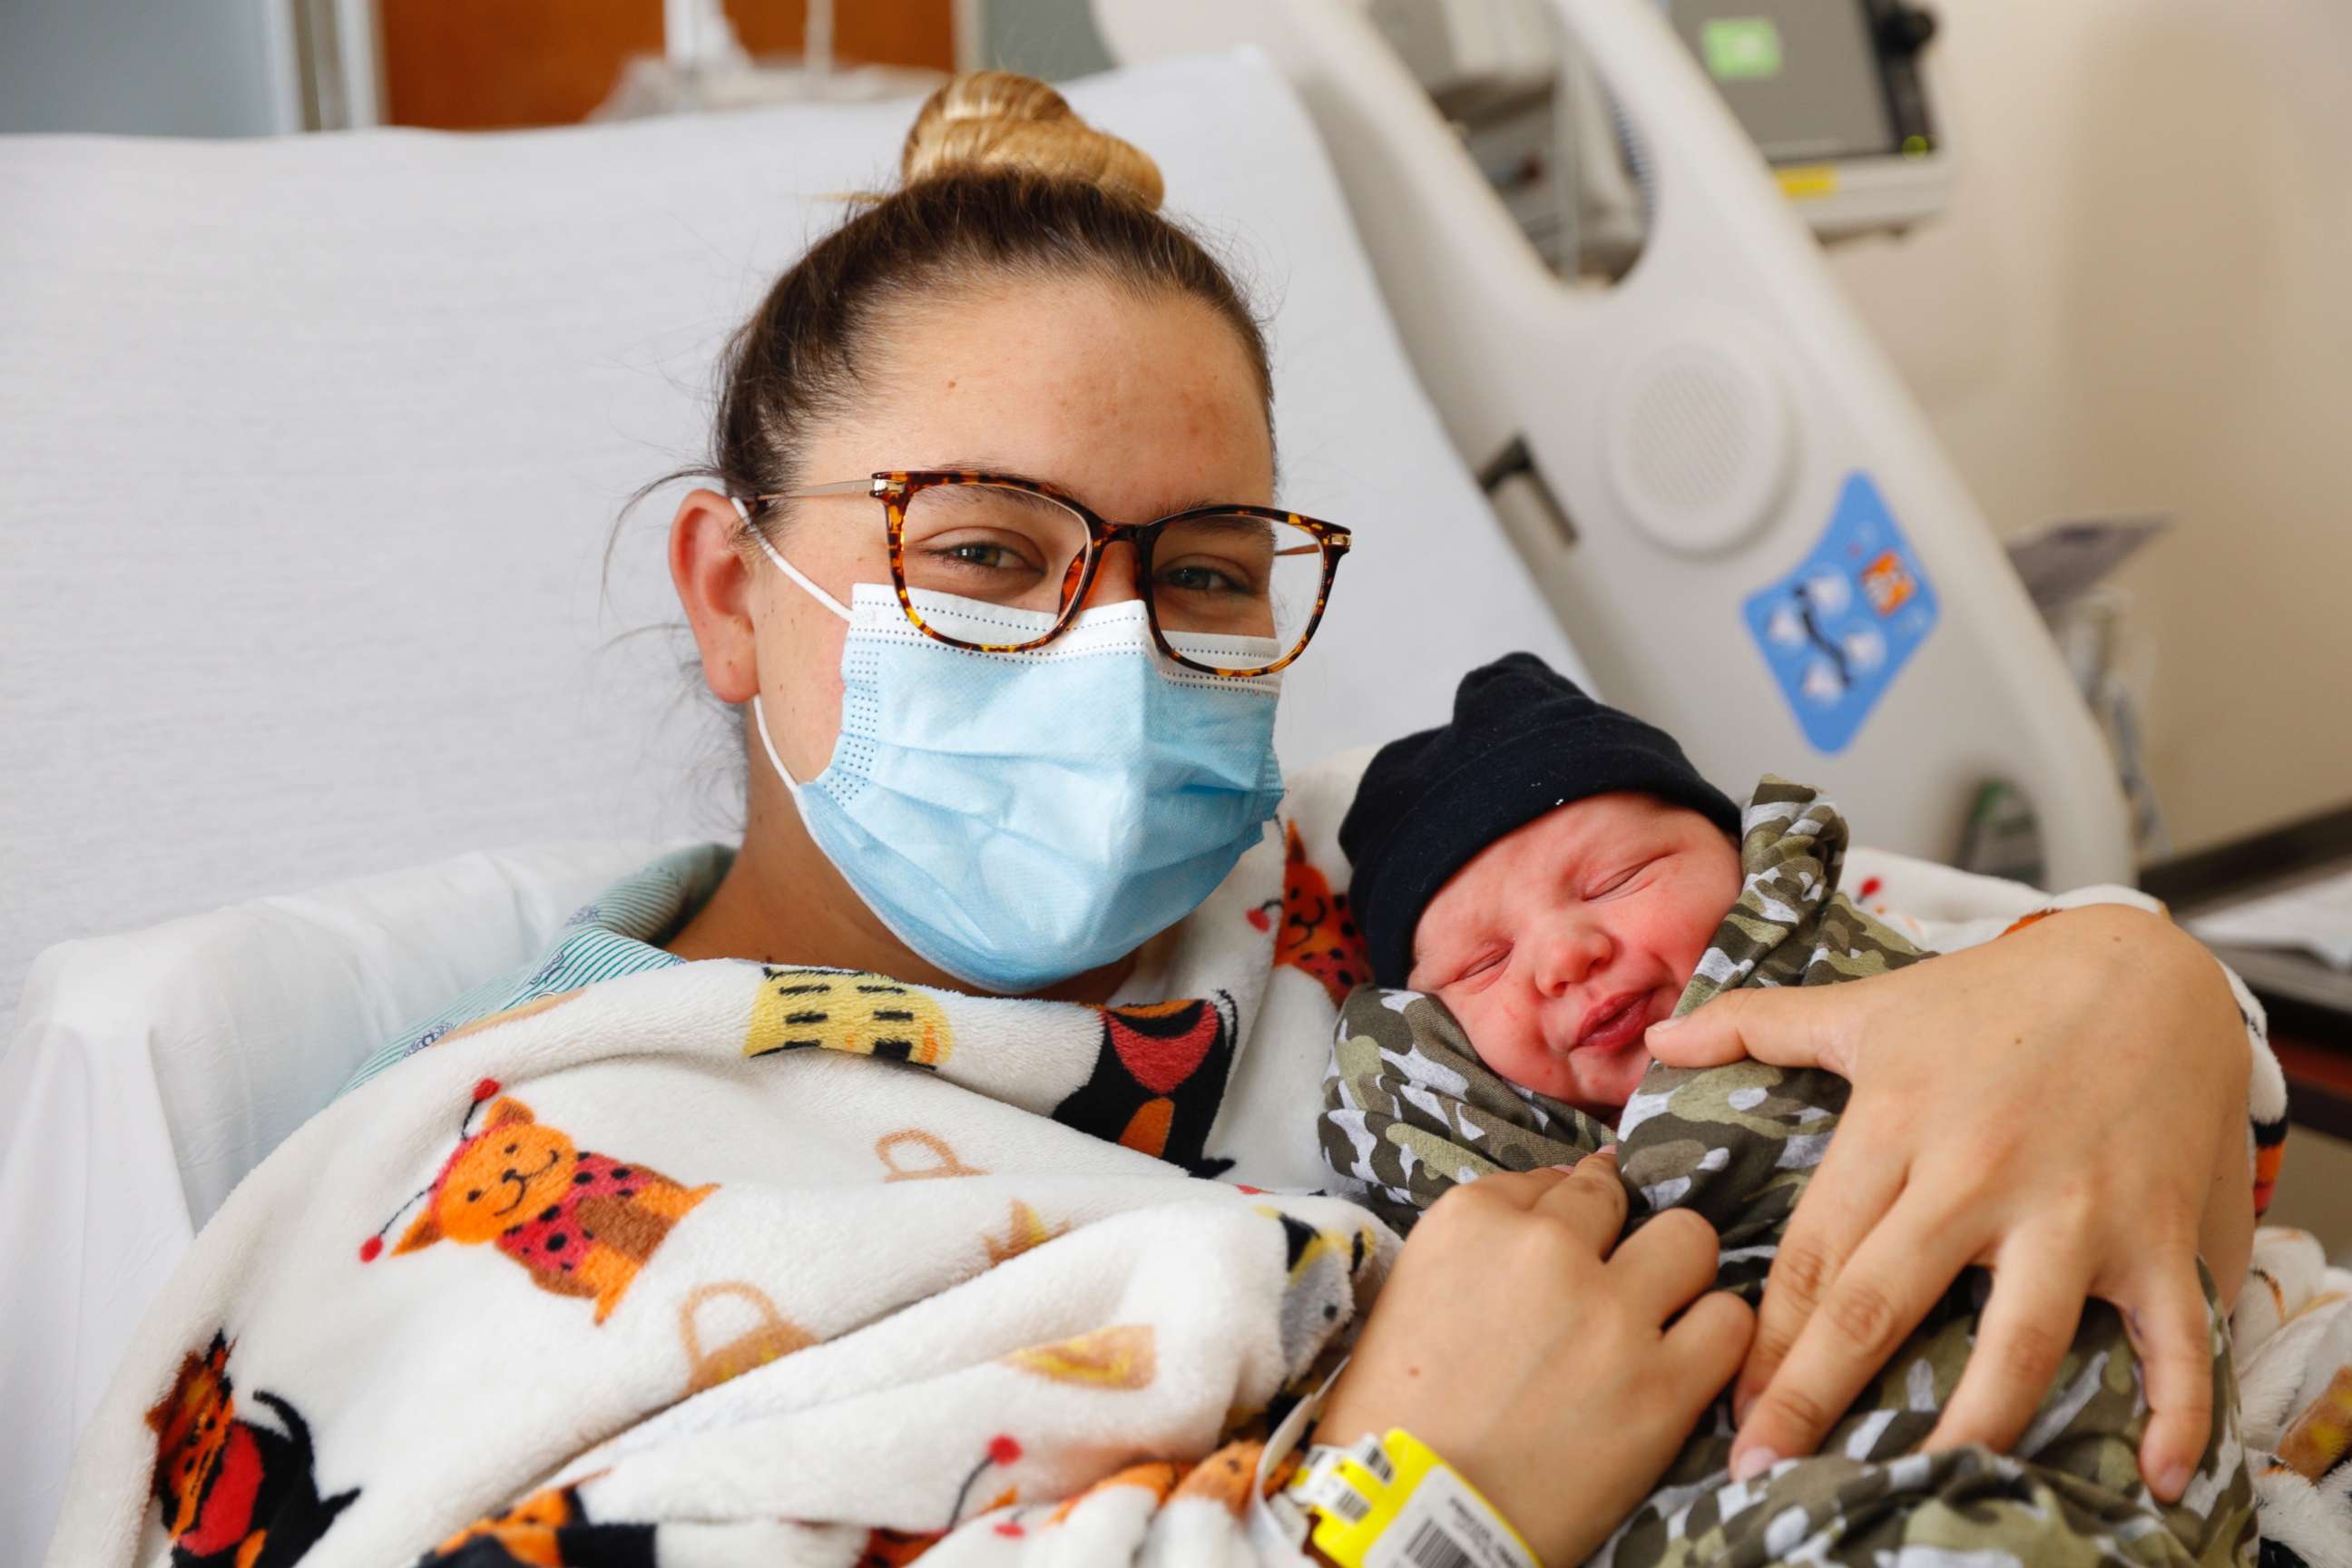 PHOTO: Carter Kerr was born at Health First's Cape Canaveral Hospital in Cocoa Beach, Florida, on 3/21 (March 21) at 3:21 p.m in the 321 area code in Brevard County. Mom Charish Persico of Merritt Island, was originally due on March 26.